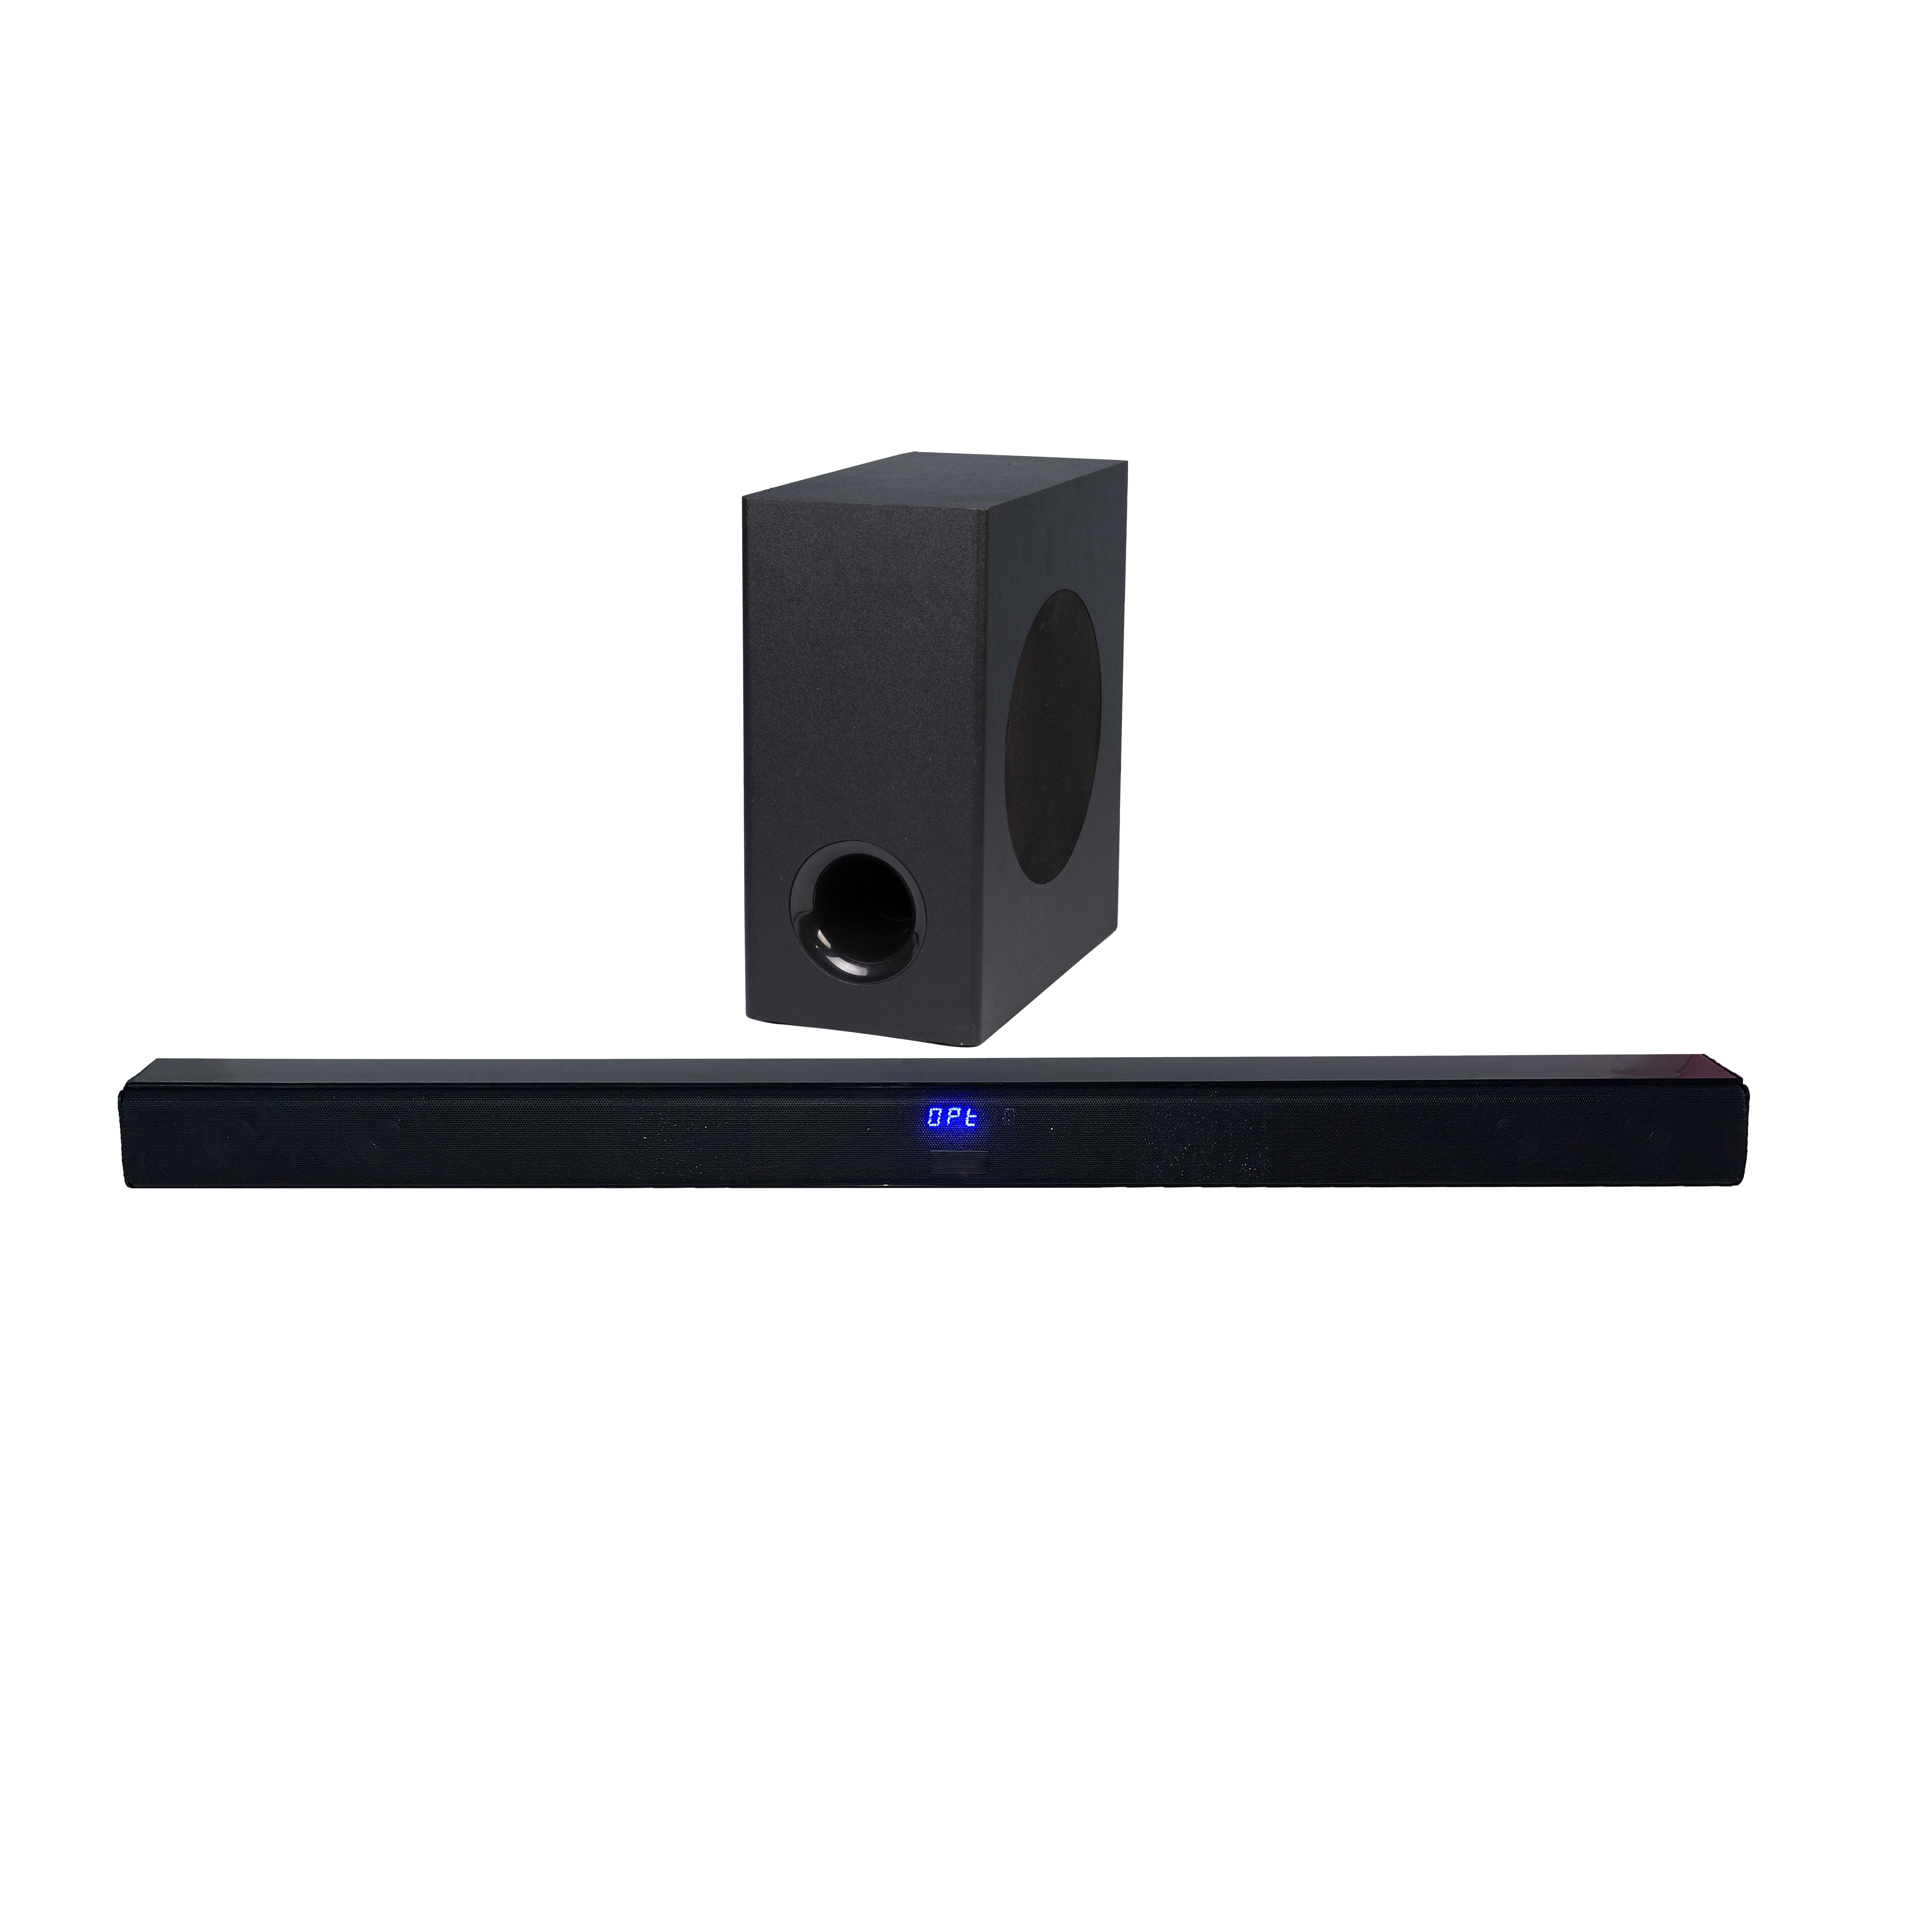 2.1 Soundbar with Wireless Subwoofer USB AUX Optical HDMI ARC Side cover button with Light